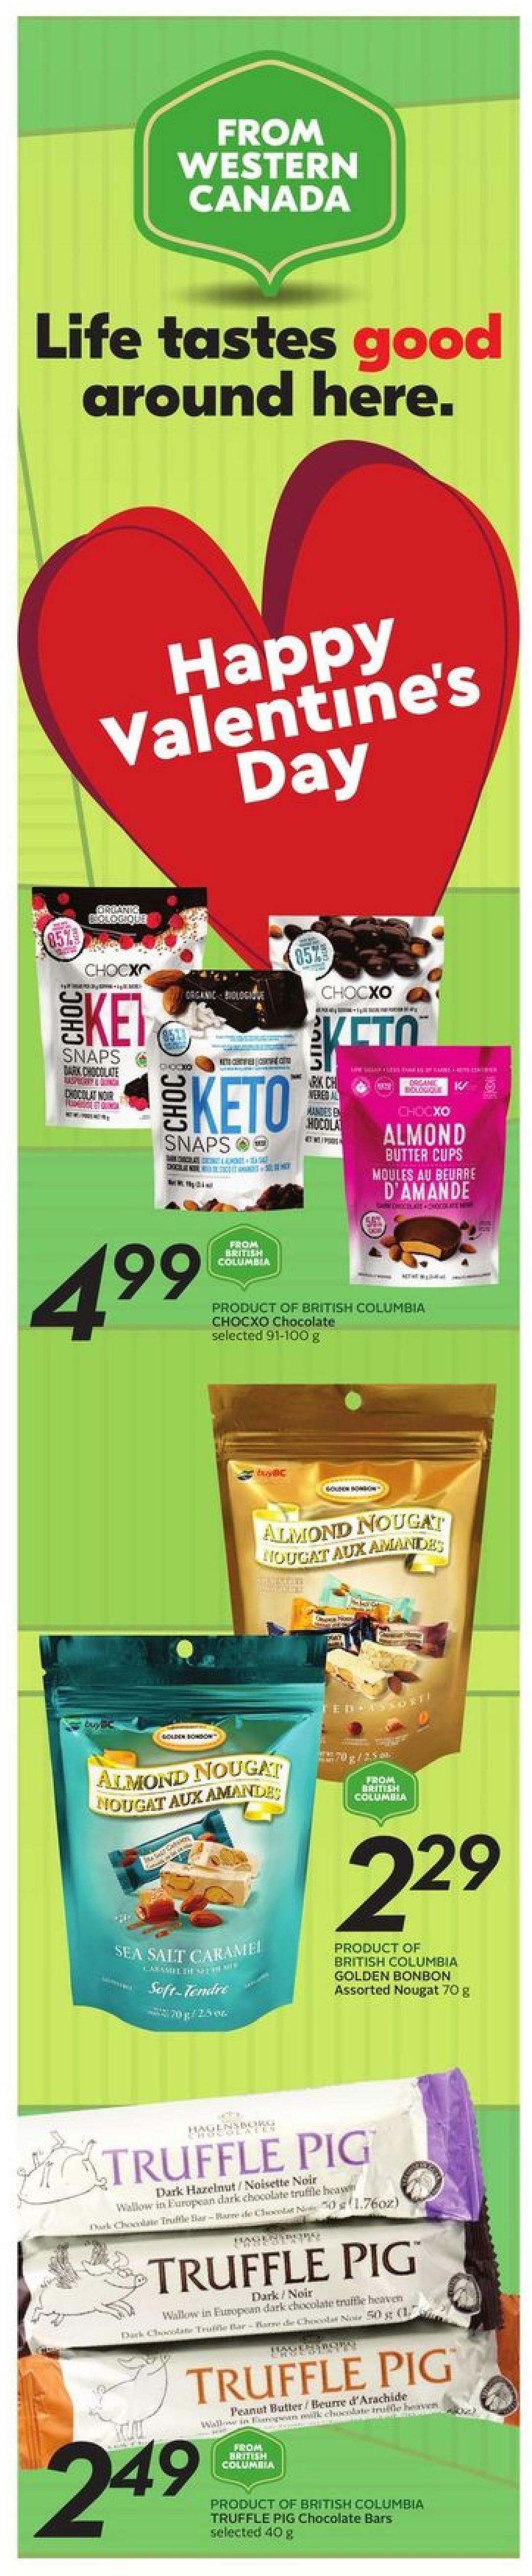 Safeway Flyer from February 11